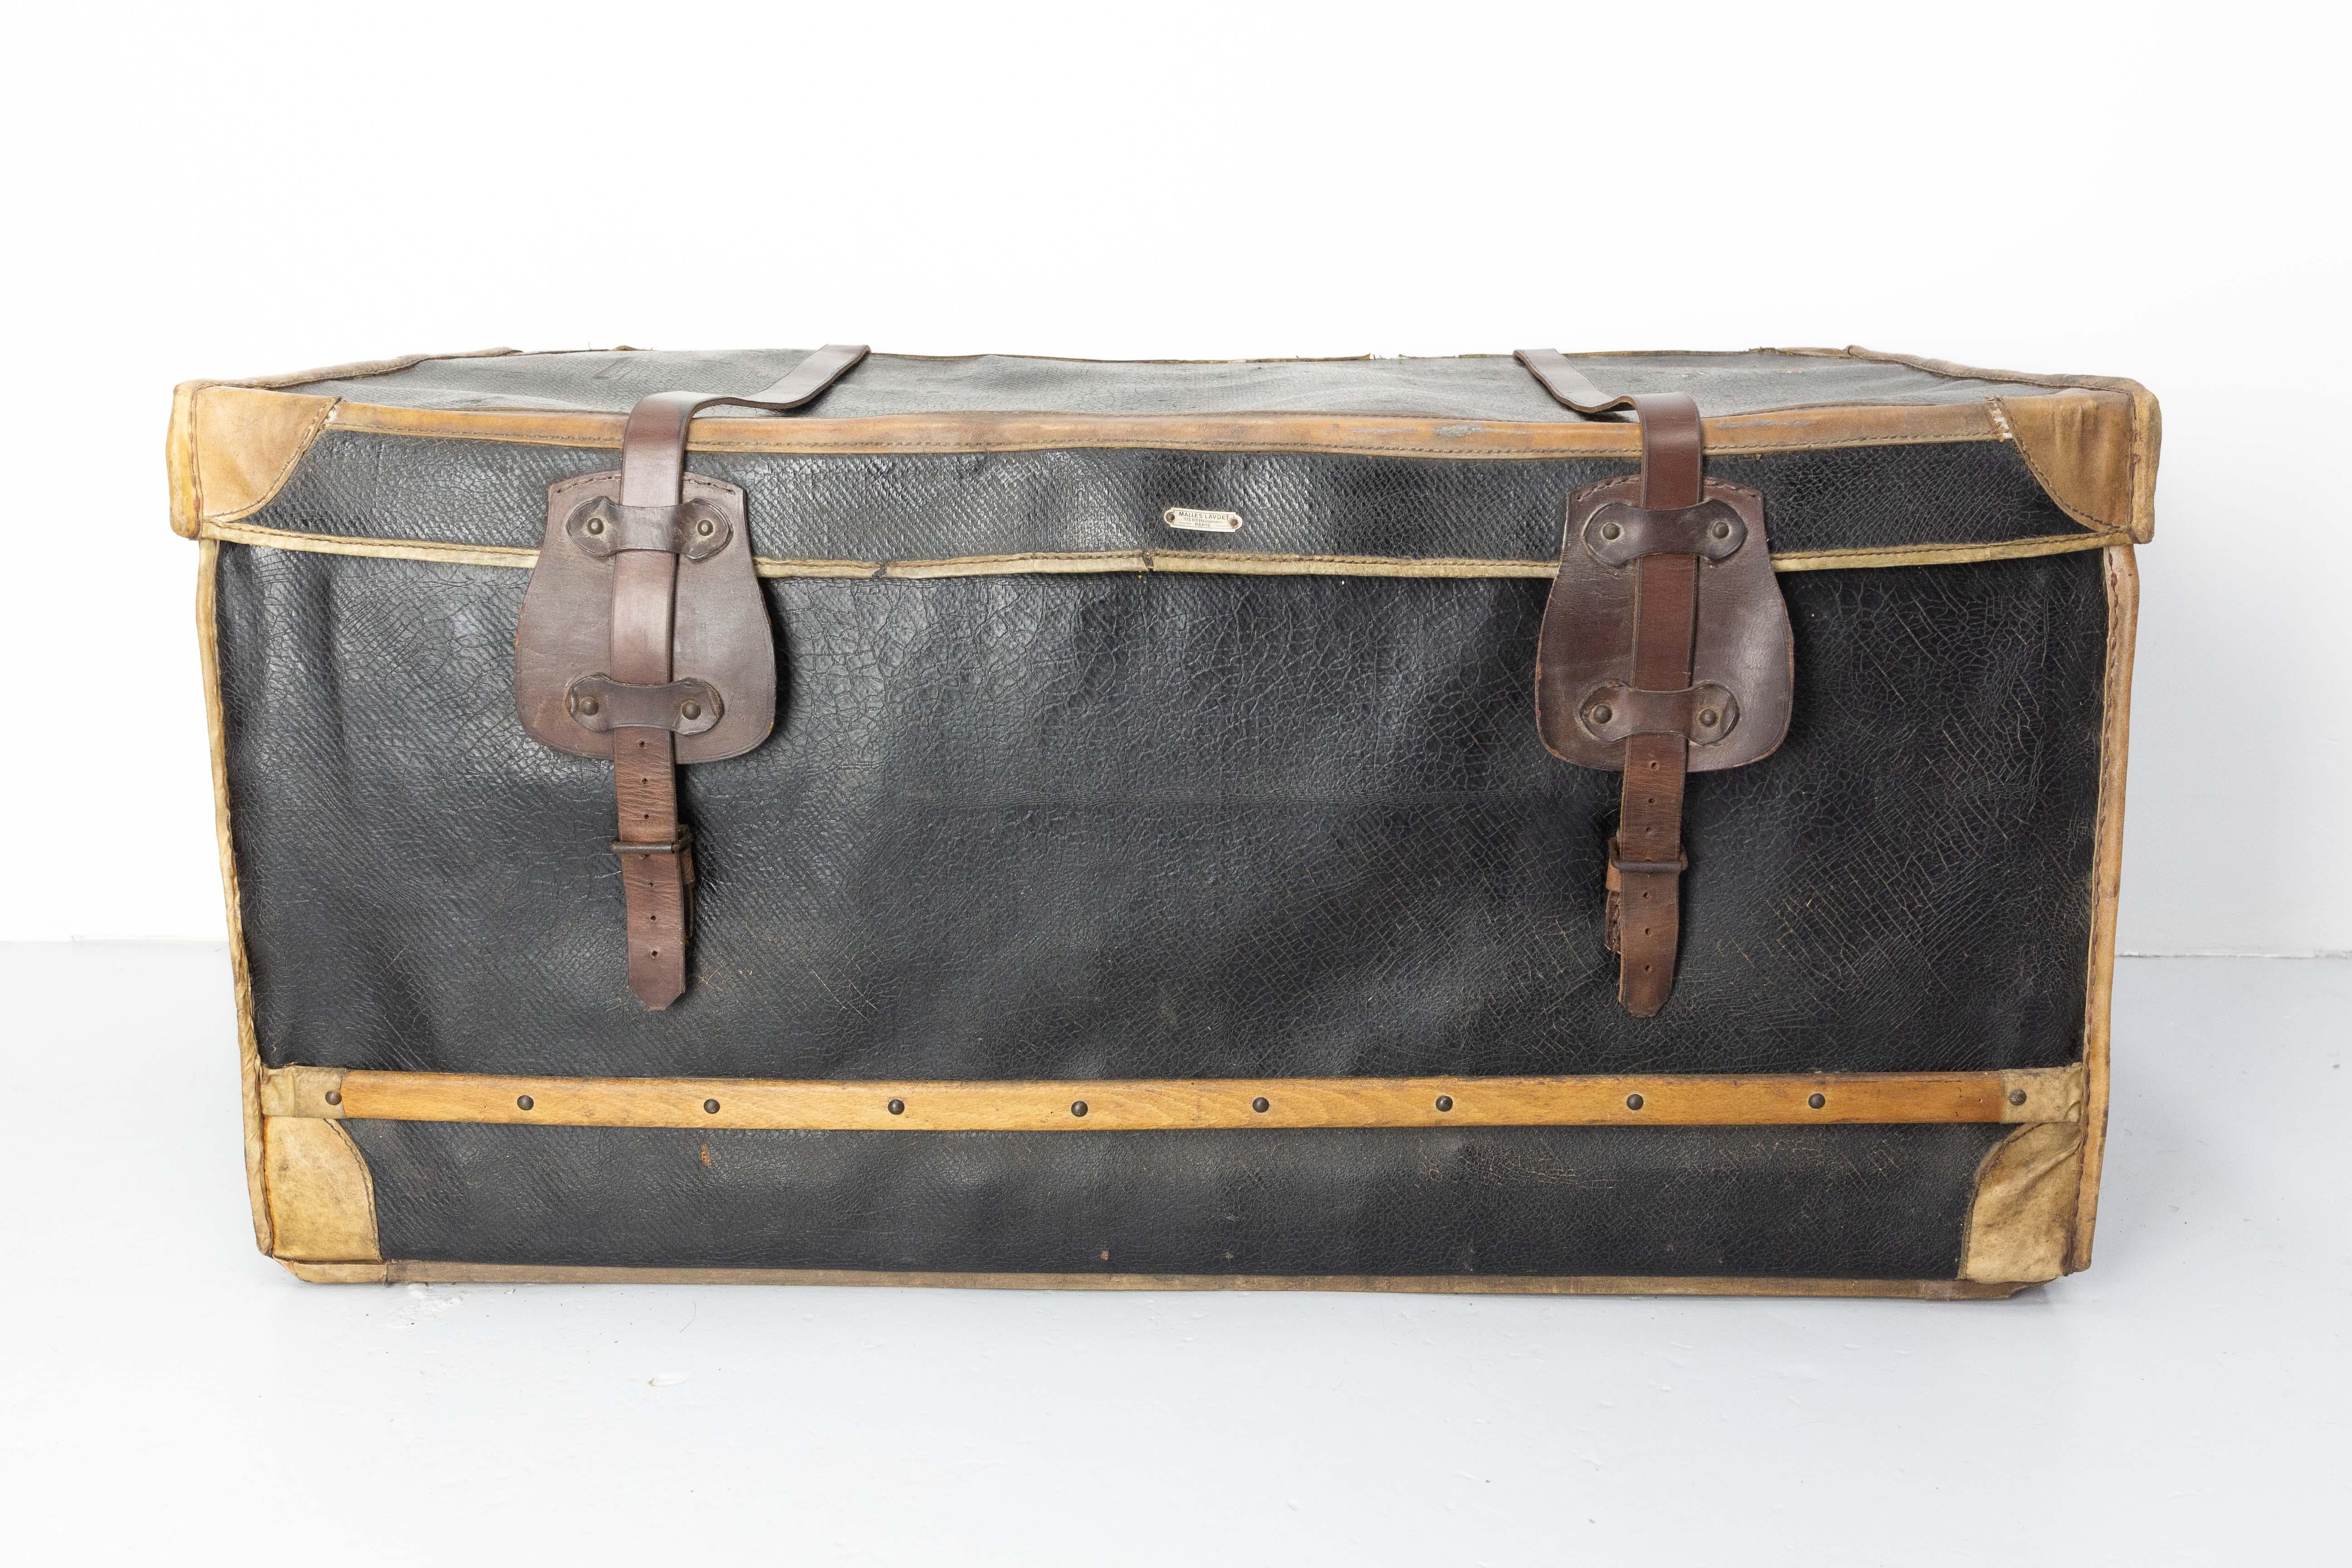 French antique trunk, made of wicker, coated canvas, and with leather belts. Two train labels from a journey from Paris to Chantilly (city known for her castel and her royal stables).
Made by Maison Lavoet, 175 Boulevard Haussmann, Paris., with the